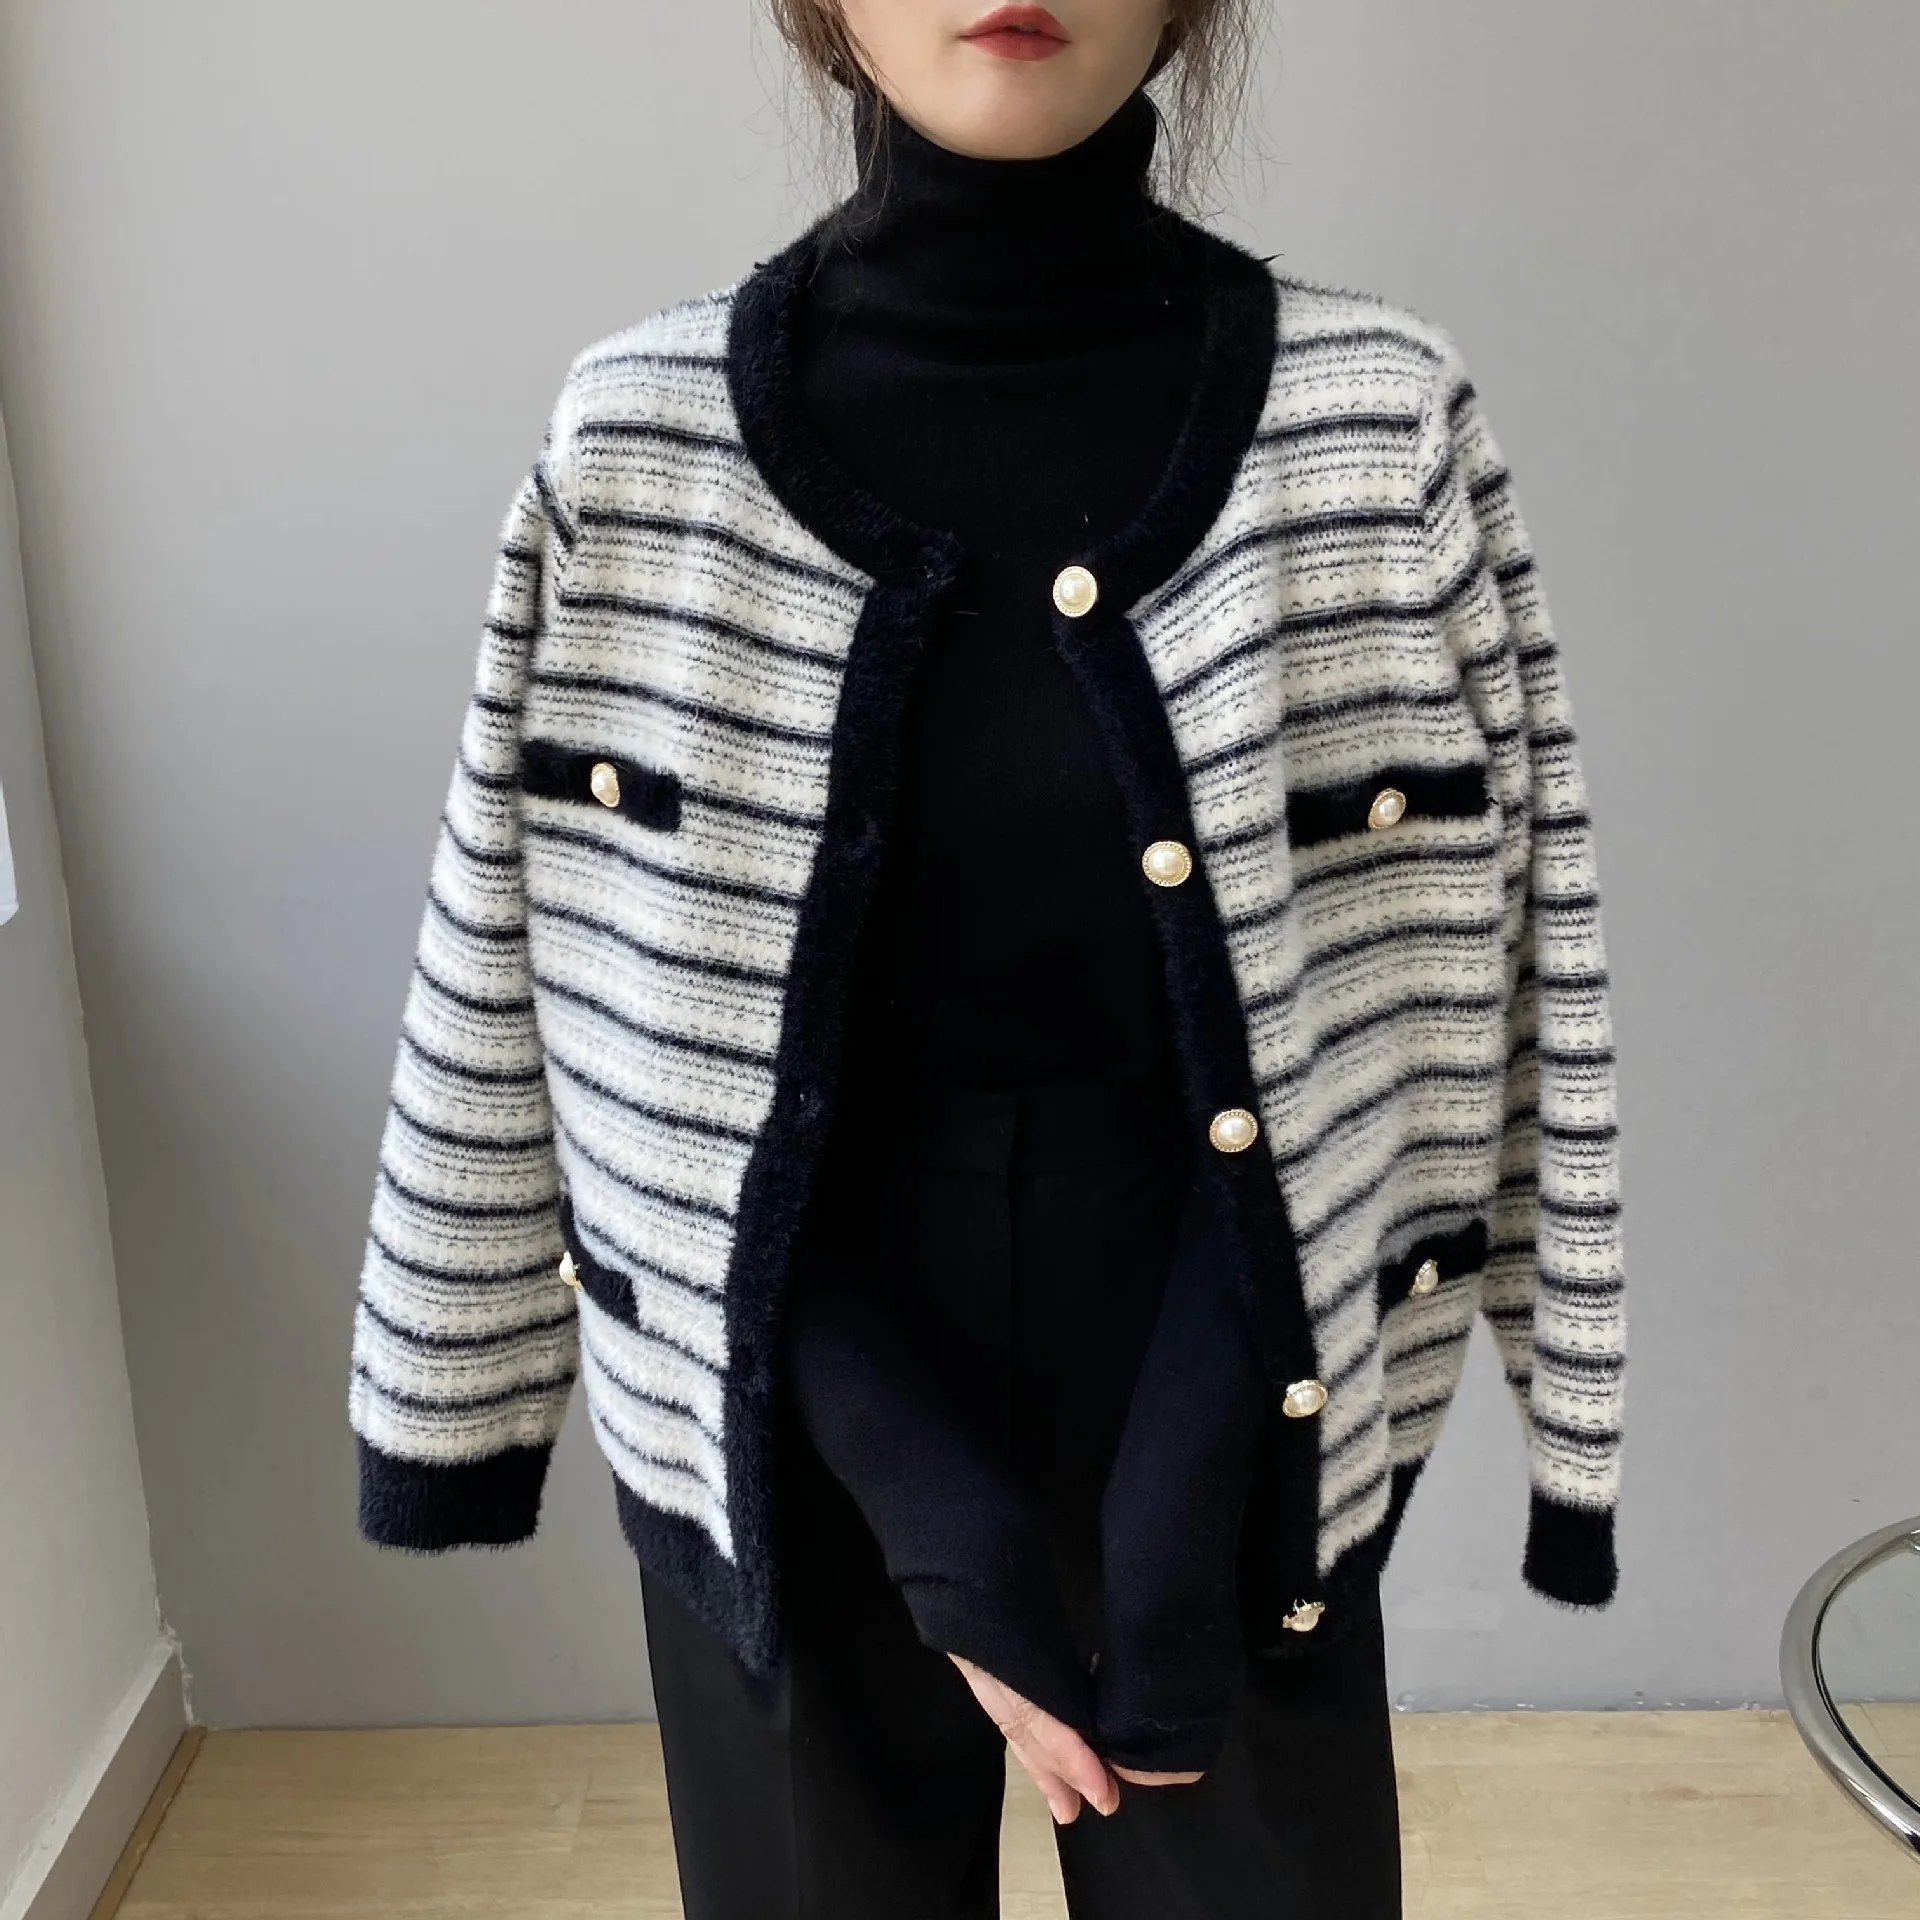 pink cardigan 2021 Autumn Women Vintage O-Neck Knitted Coat Striped Tops Long Sleeve Women Cardigans Fashion Casual Sweater brown cardigan Sweaters